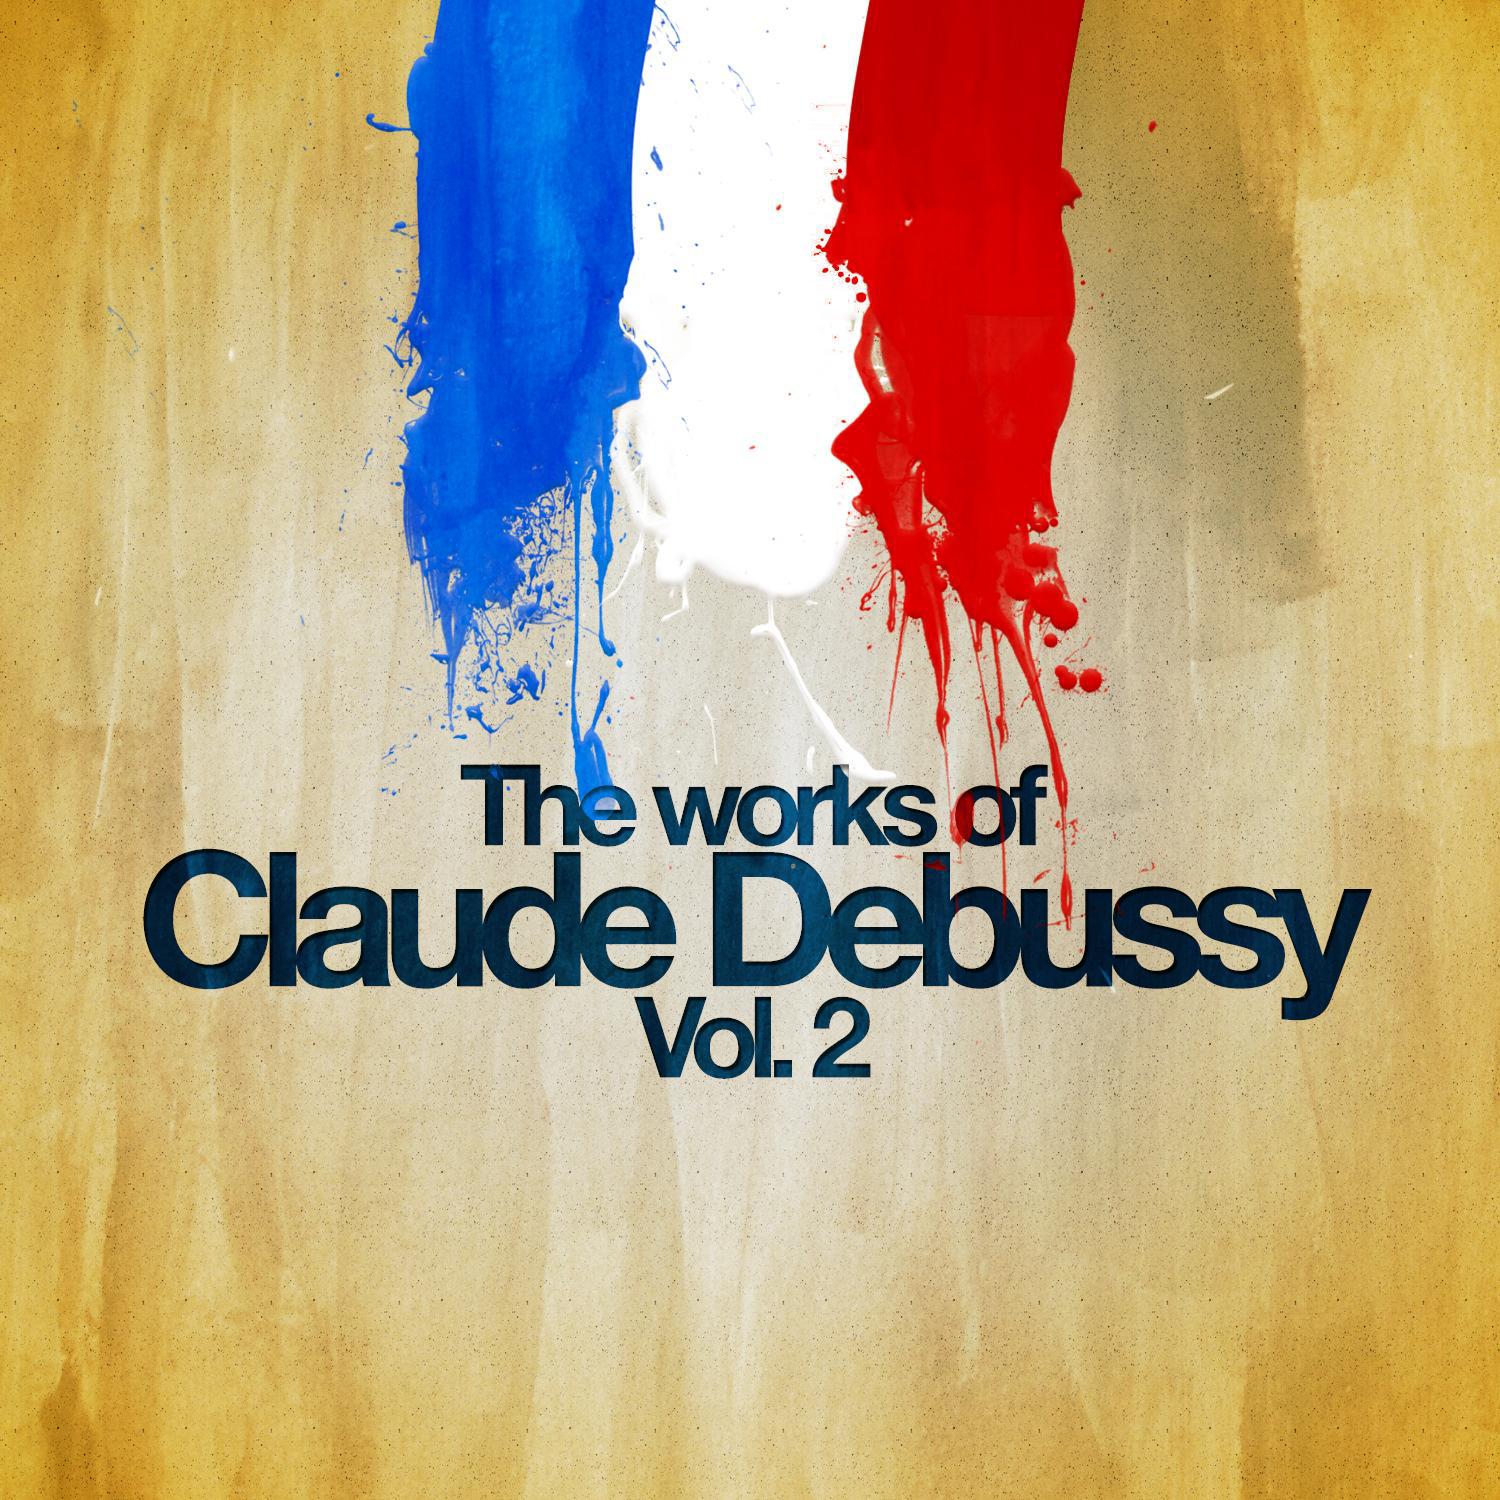 The Works of Claude Debussy, Vol. 2